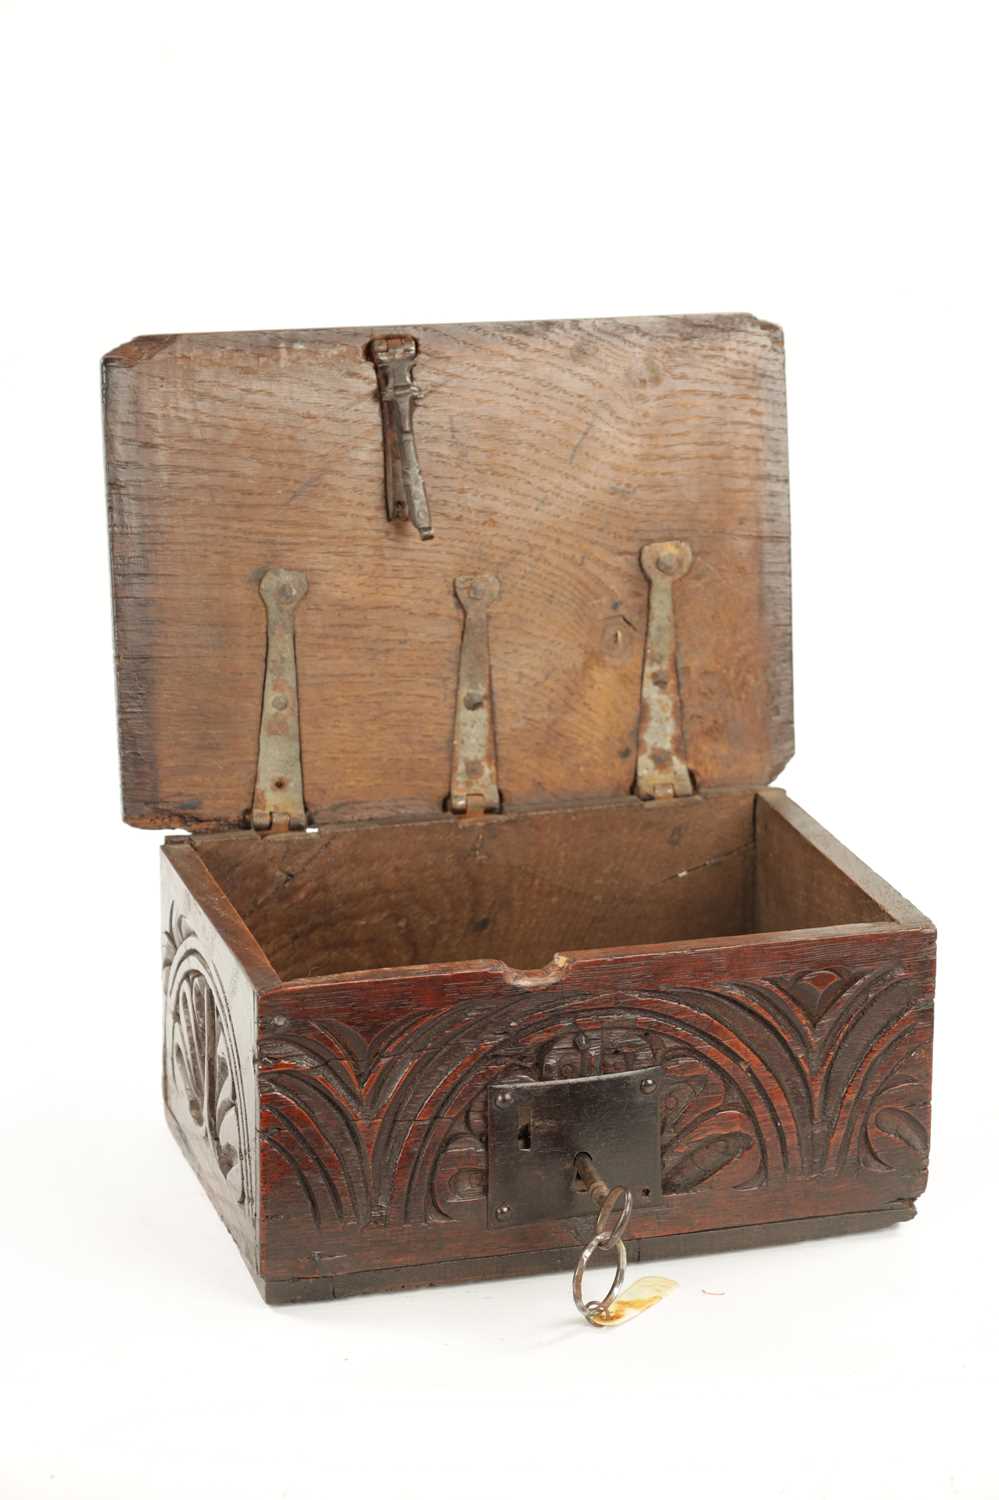 A GOOD 17TH CENTURY UNUSUALLY SMALL OAK BIBLE BOX OF FINE COLOUR AND PATINA - Image 6 of 10